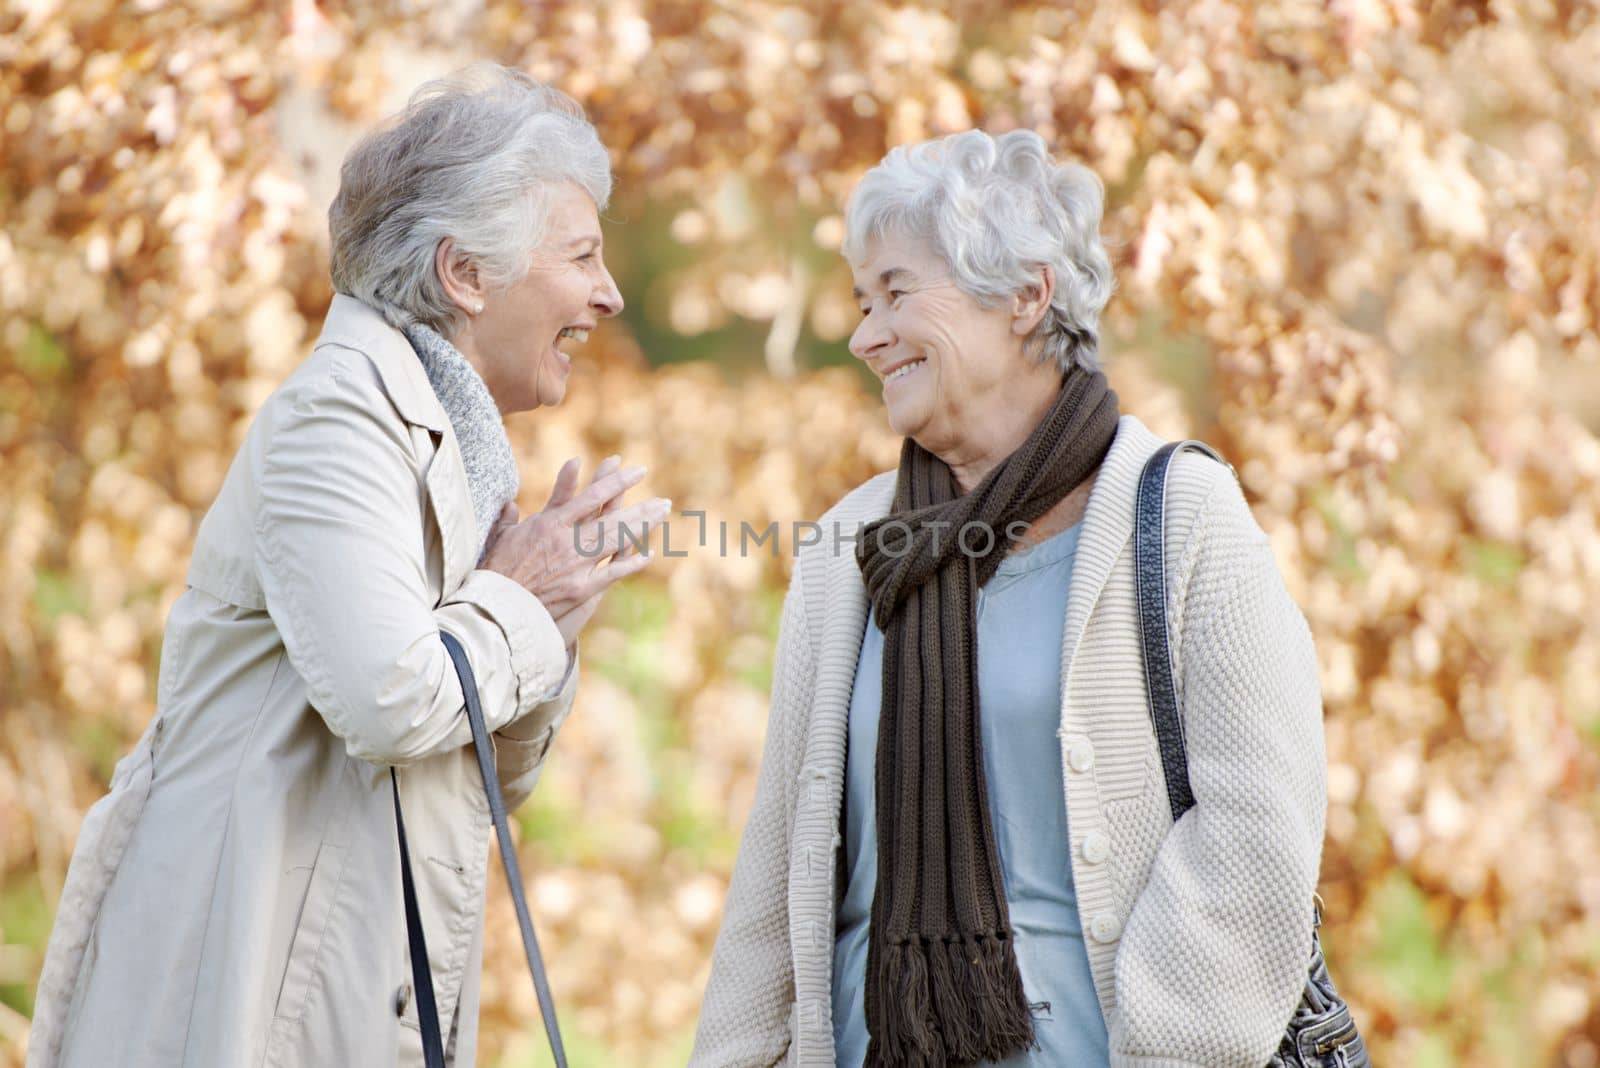 Laughing at old memories. Two senior women having a friendly conversation outside with autumn leaves in the background